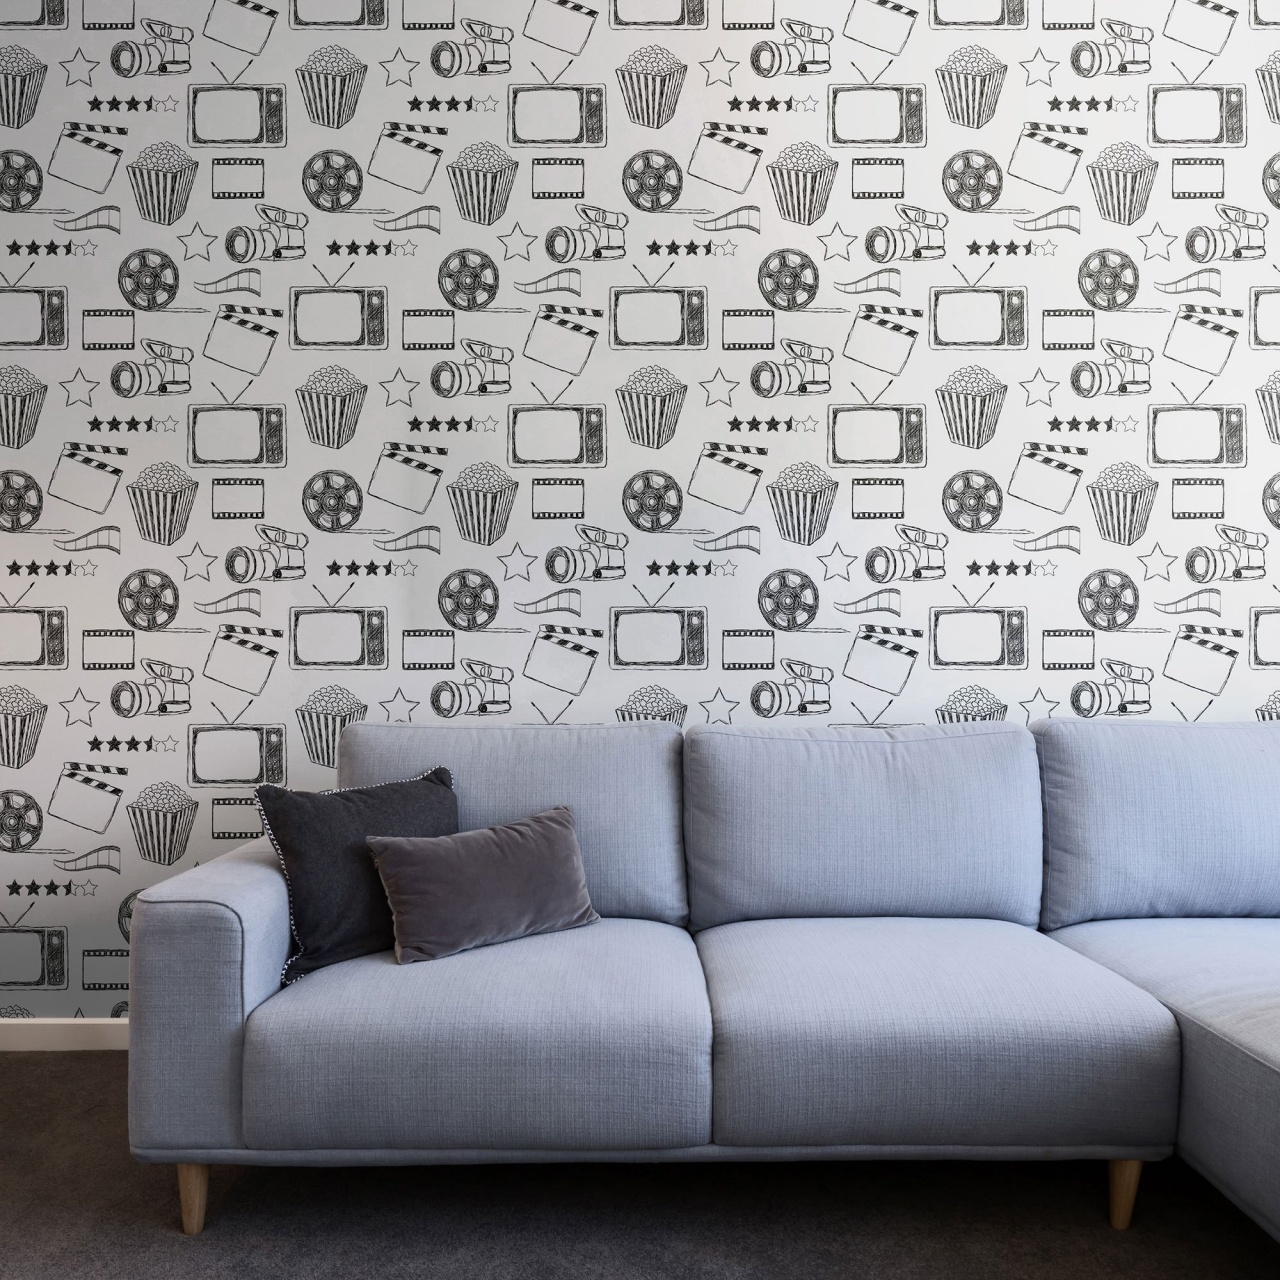 Vinyl Peel And Stick Wallpaper - Movie Themed Wallpaper For Walls , HD Wallpaper & Backgrounds